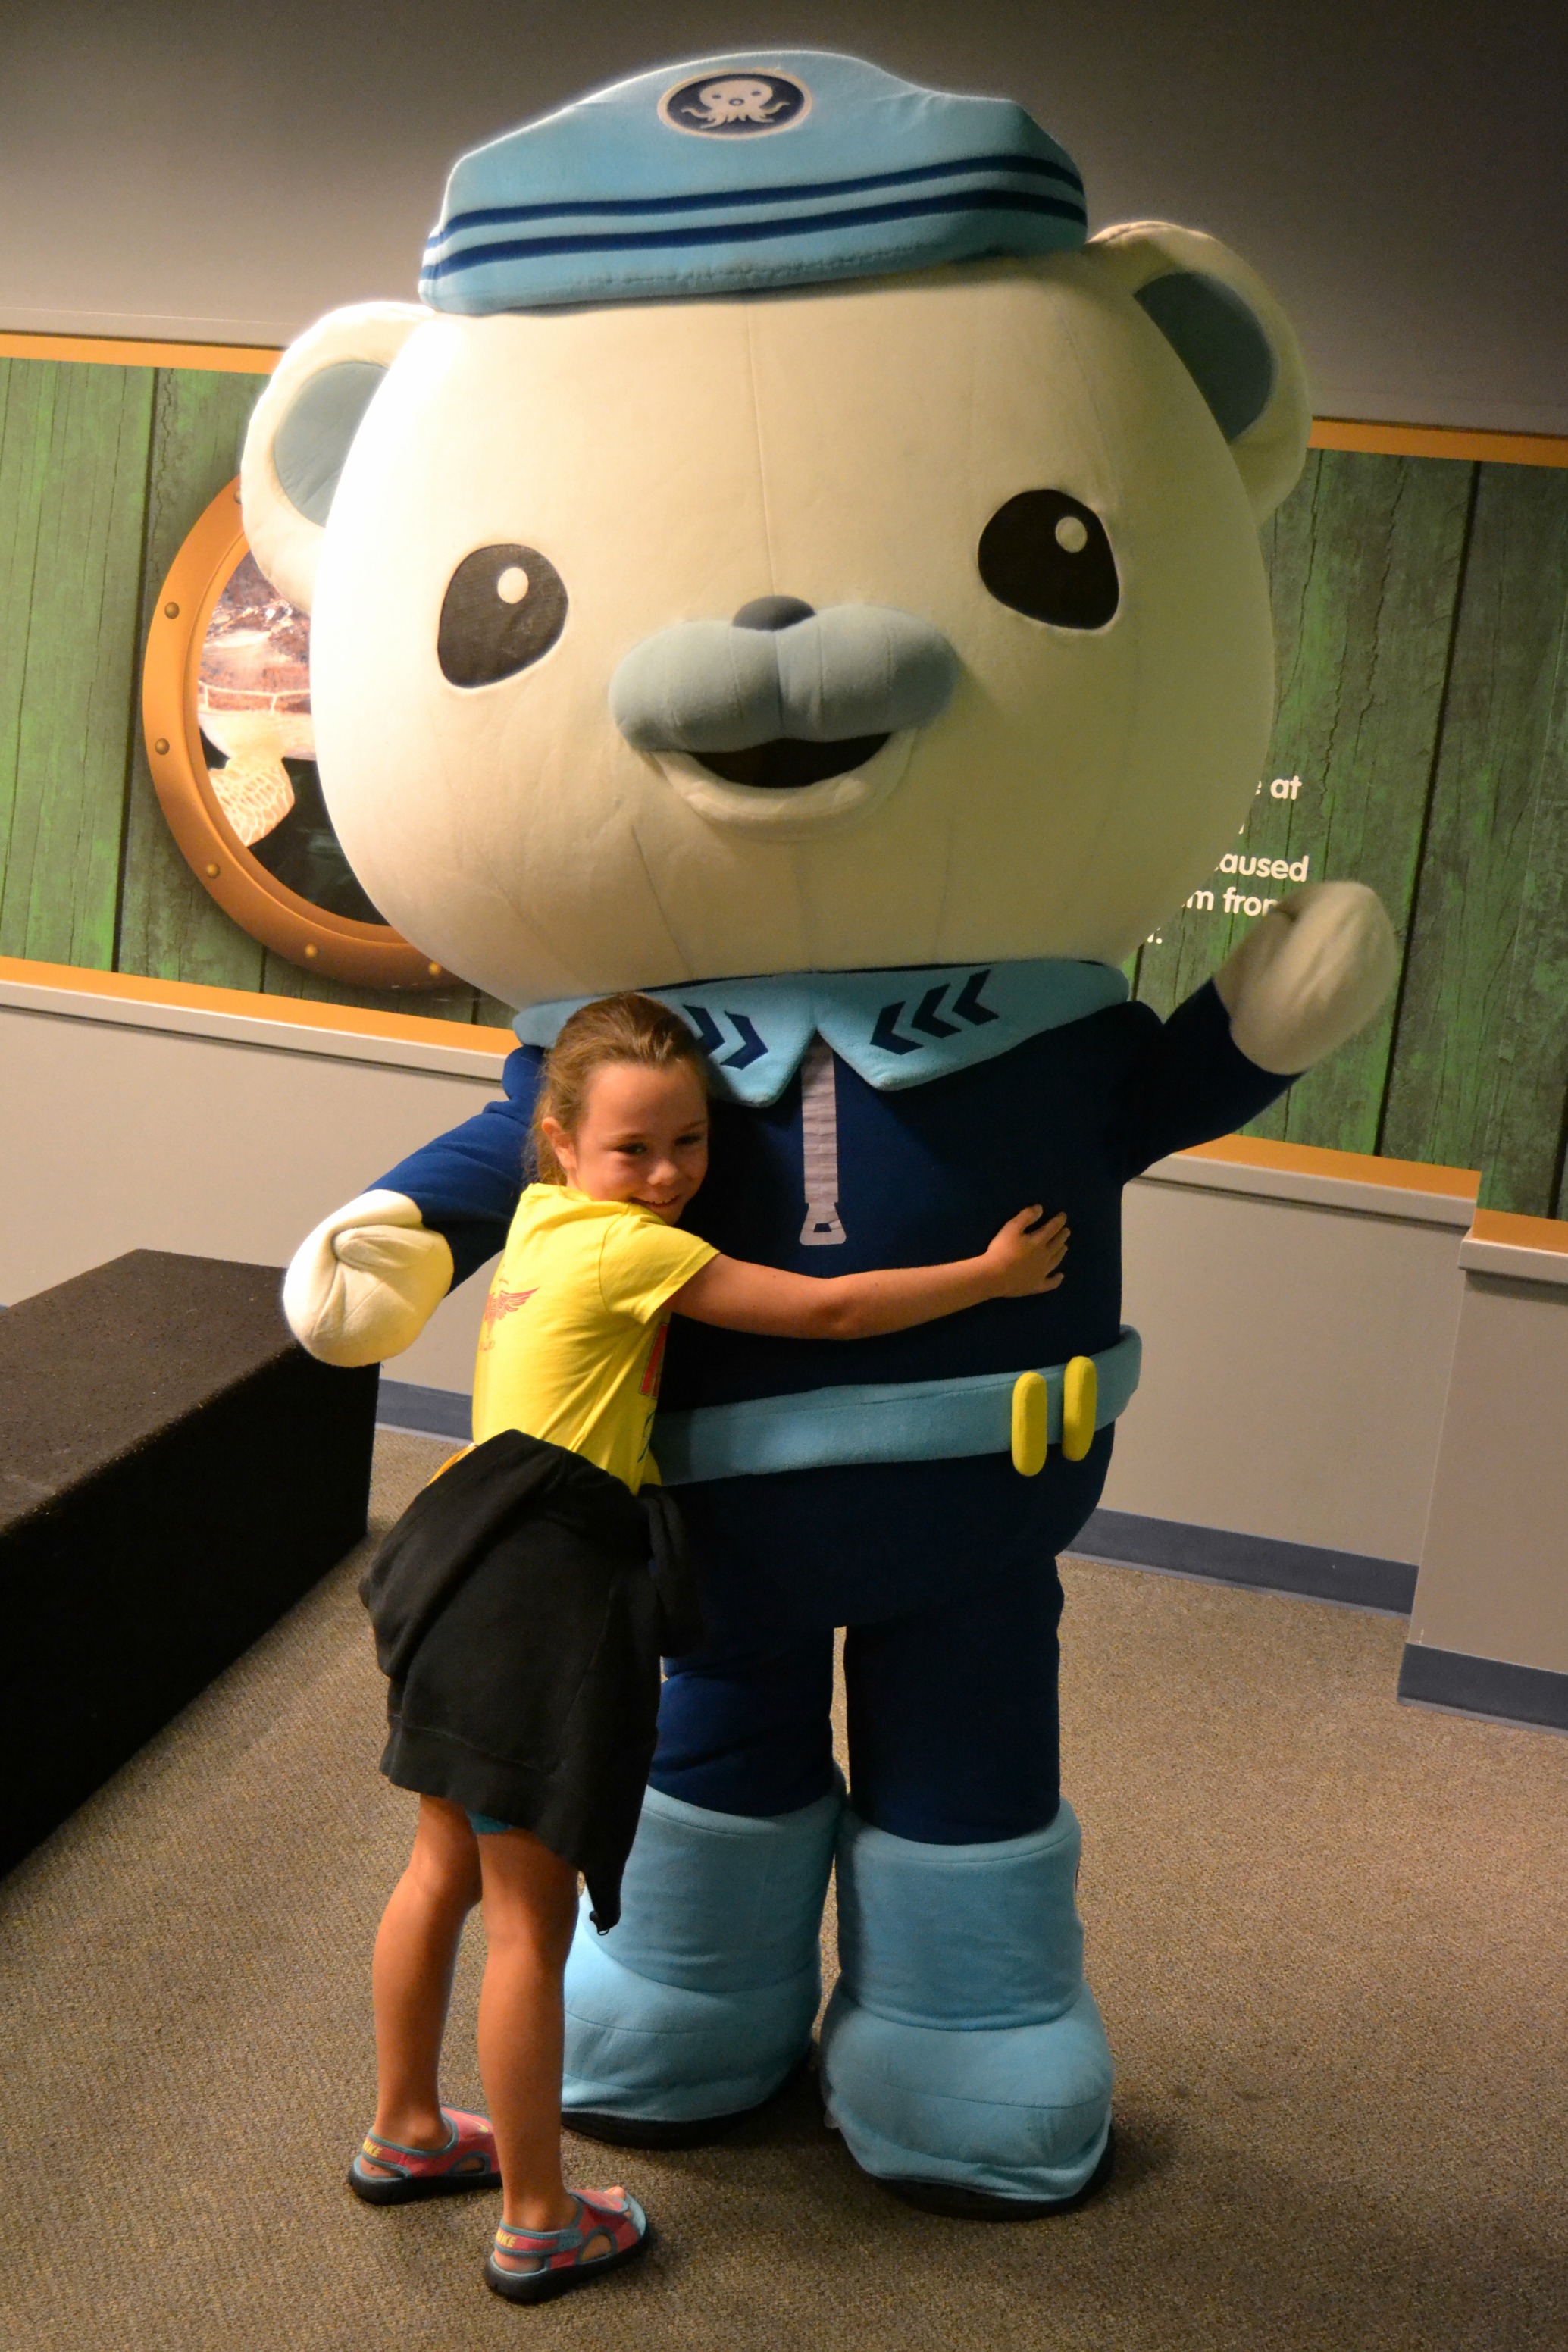 The Octonauts are visiting Fort Myers